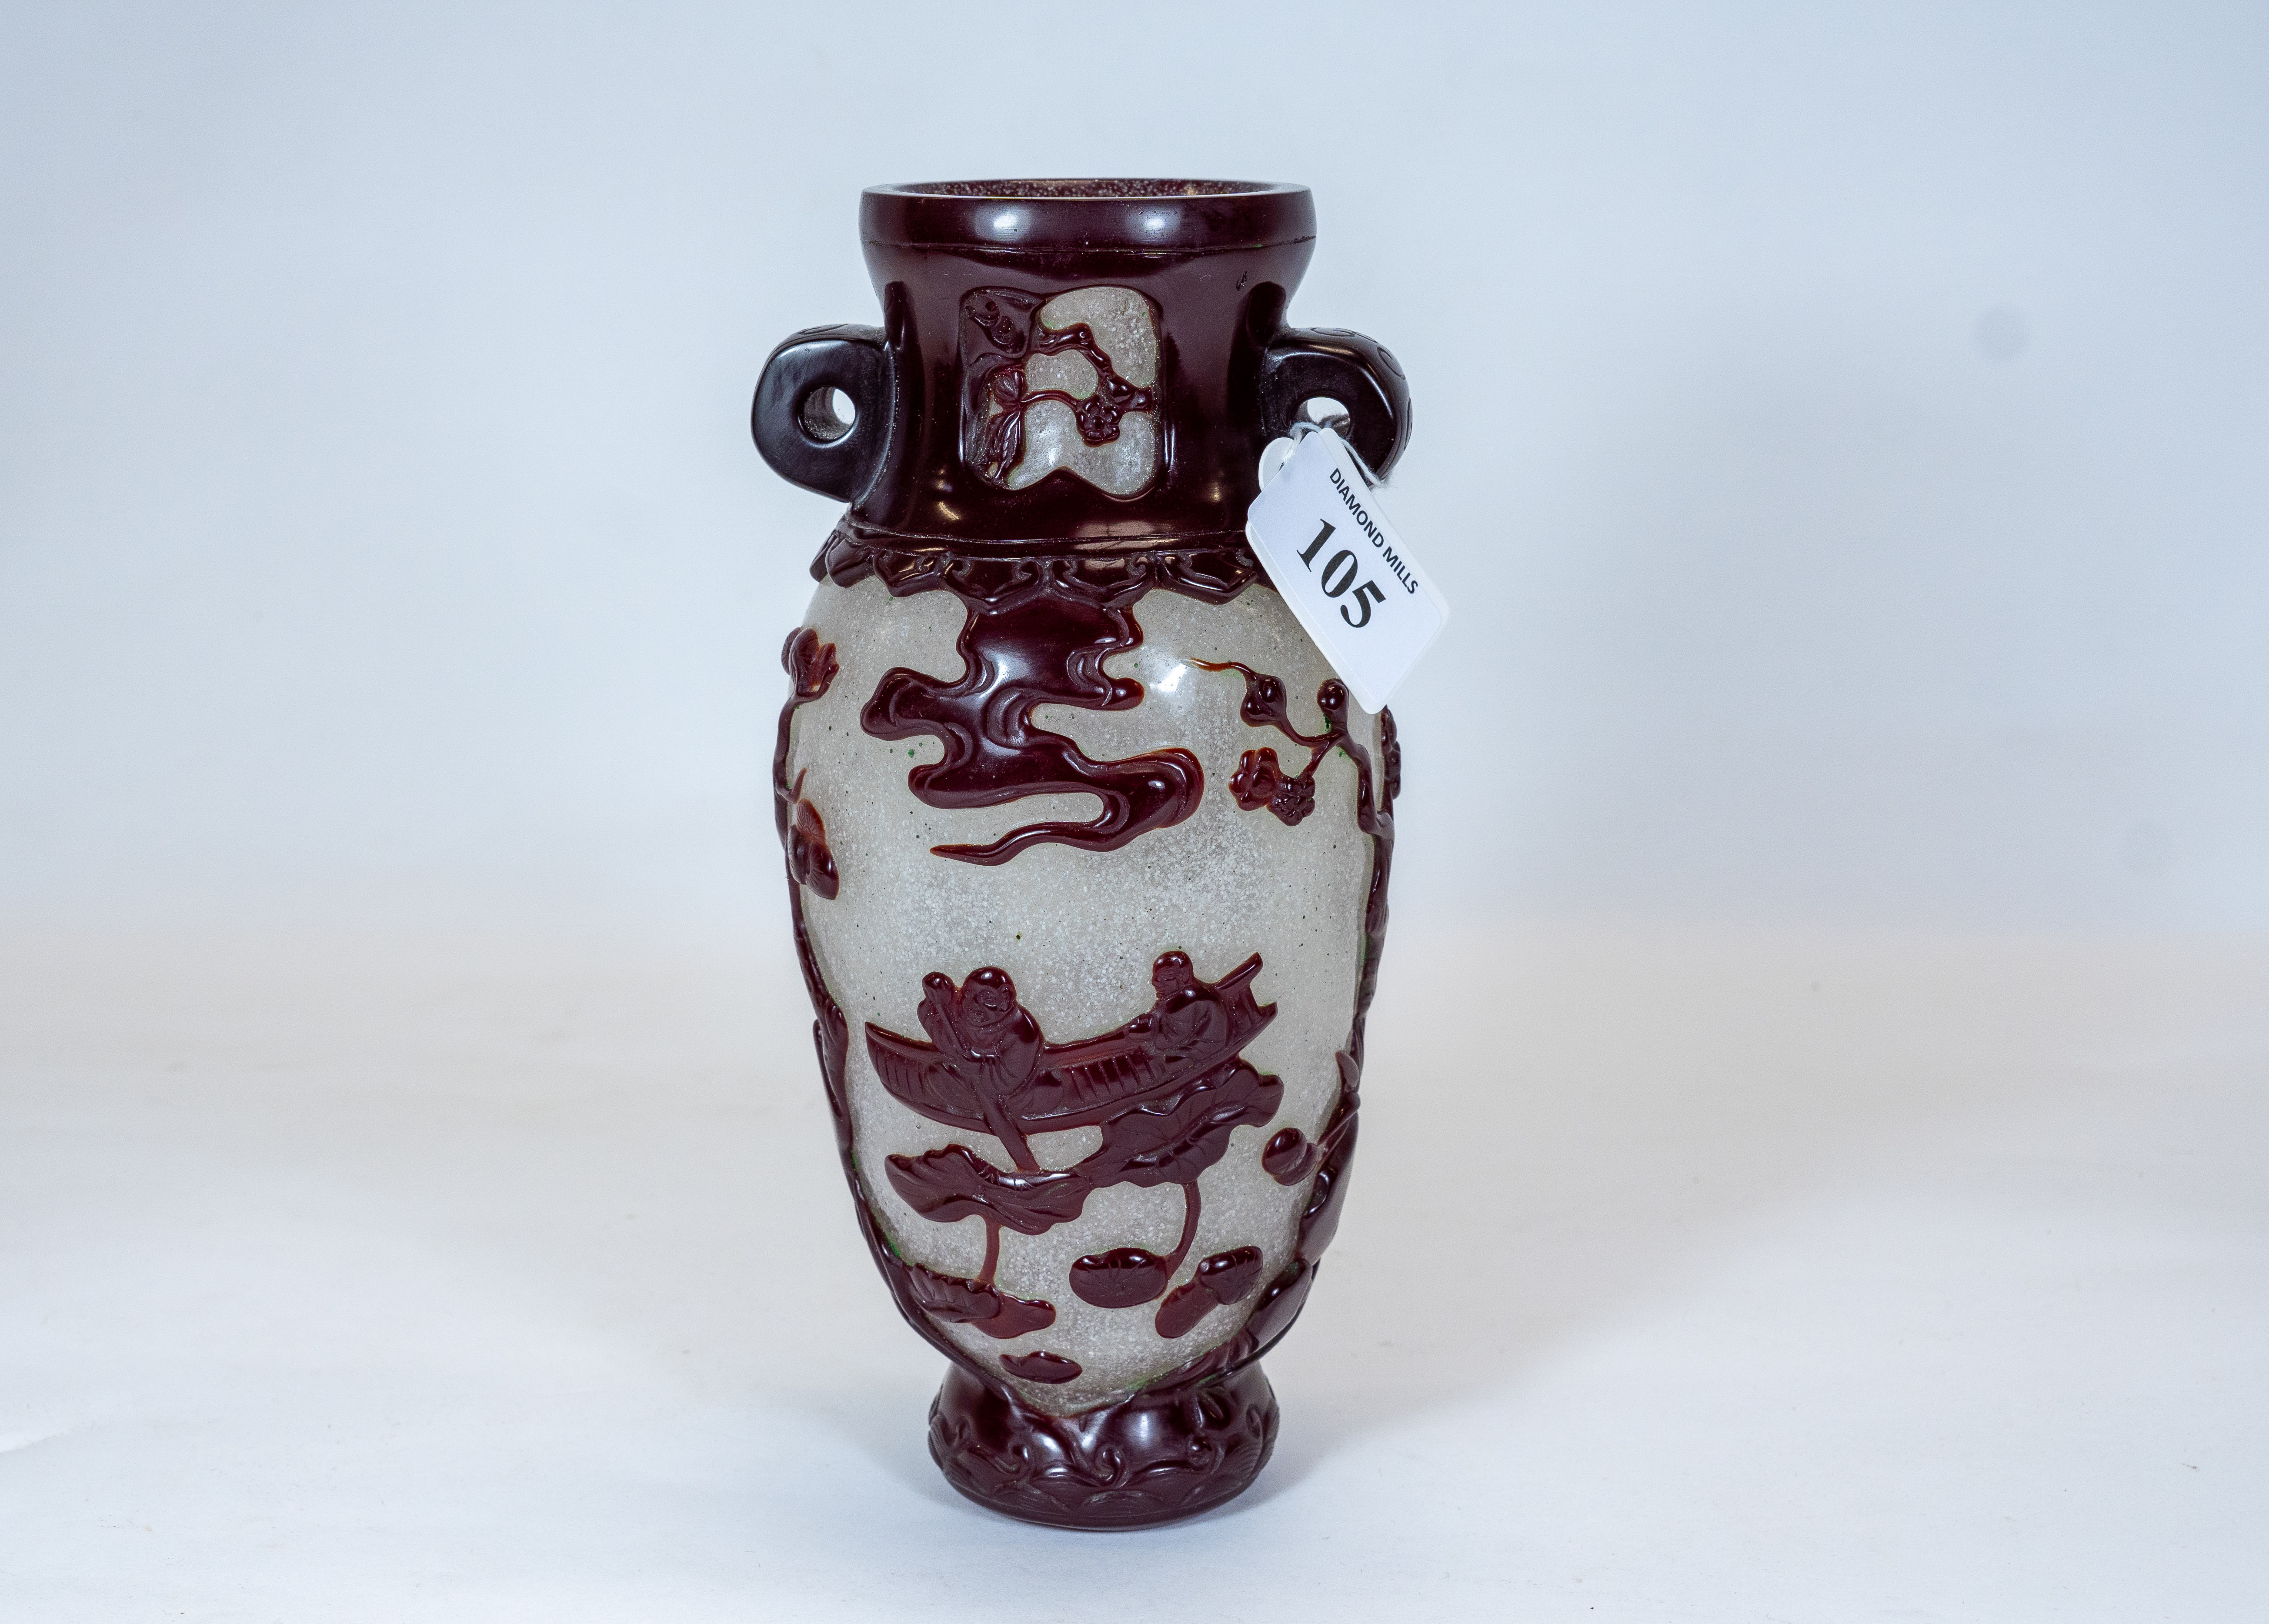 a 20th century Chinese peking carved glass vase, the speckled glass ground with red overlaid figures